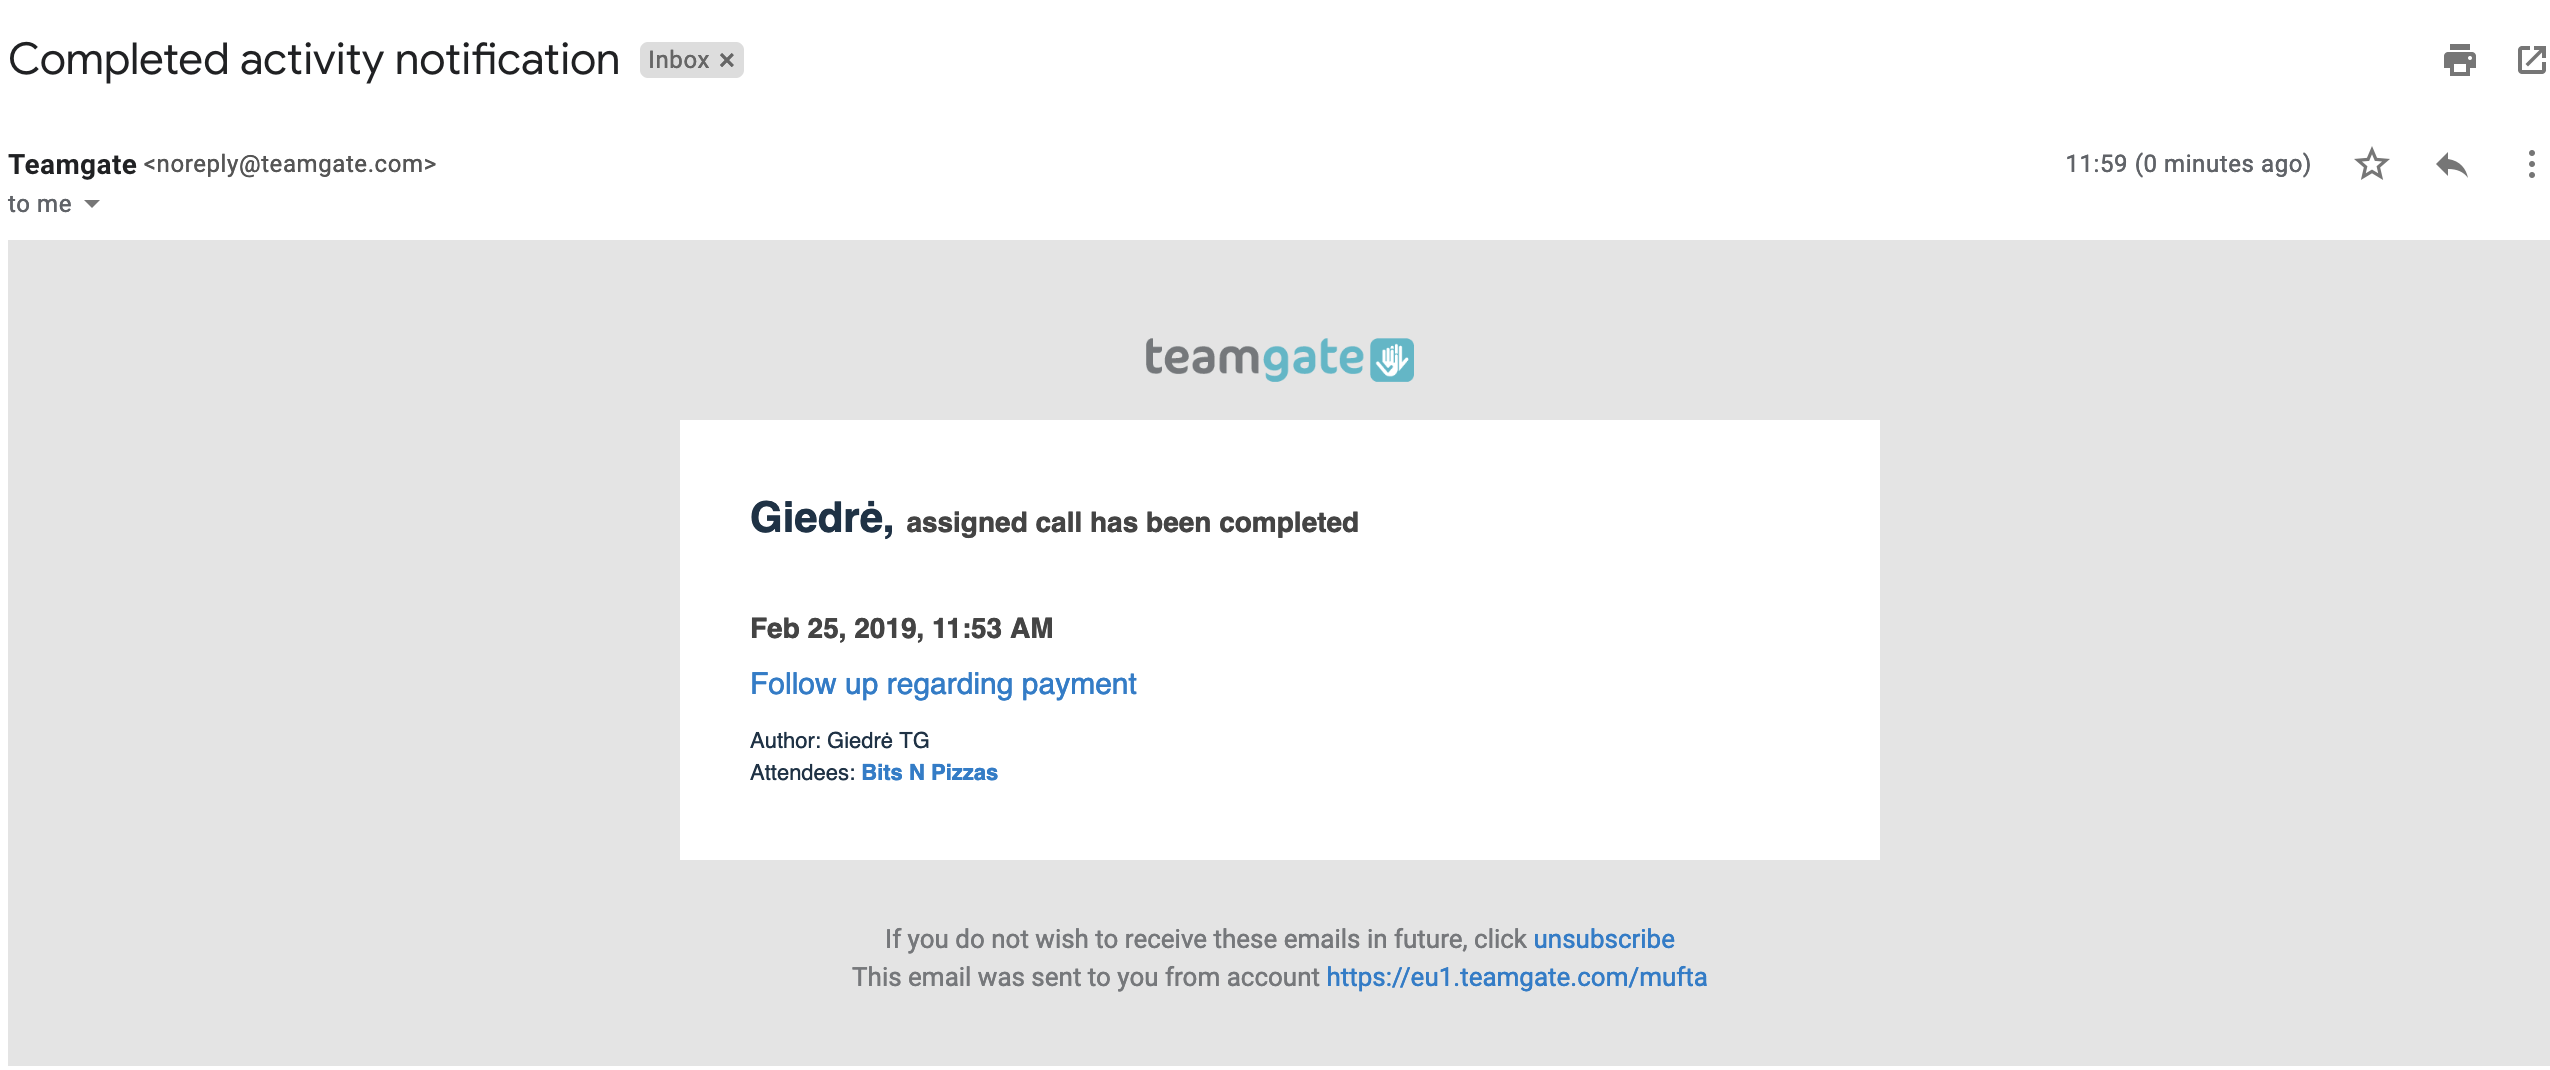 Completed-activity-notification-email-Teamgate-CRM.png